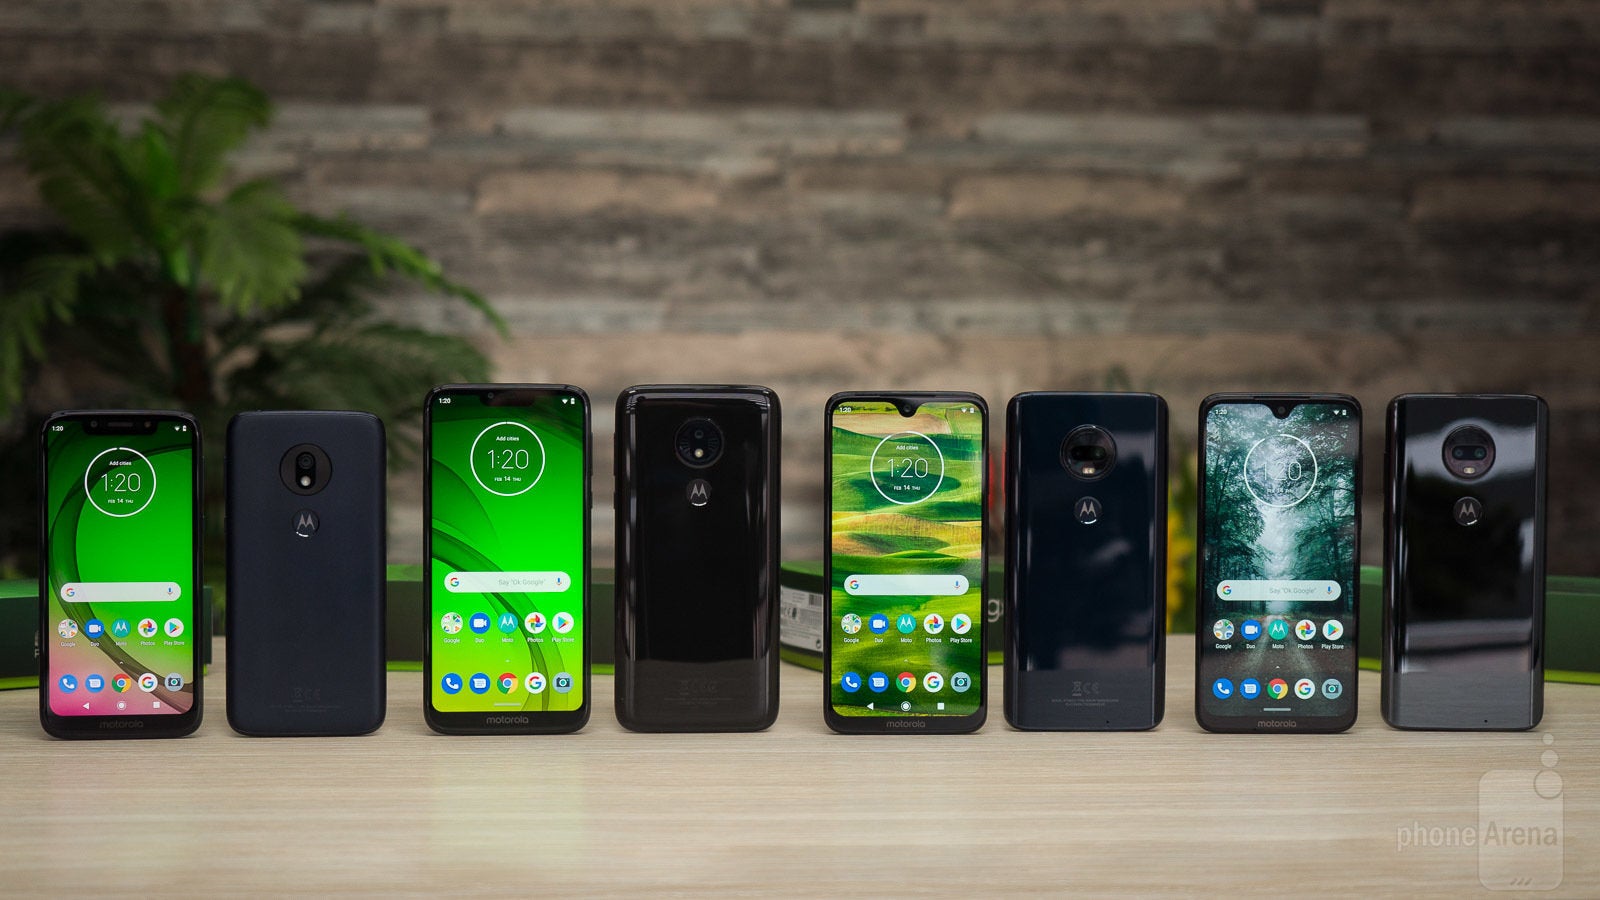 G7 Play, G7 Power, G7 and G7 Plus - Motorola Moto G7, G7 Plus, G7 Power and G7 Play Review